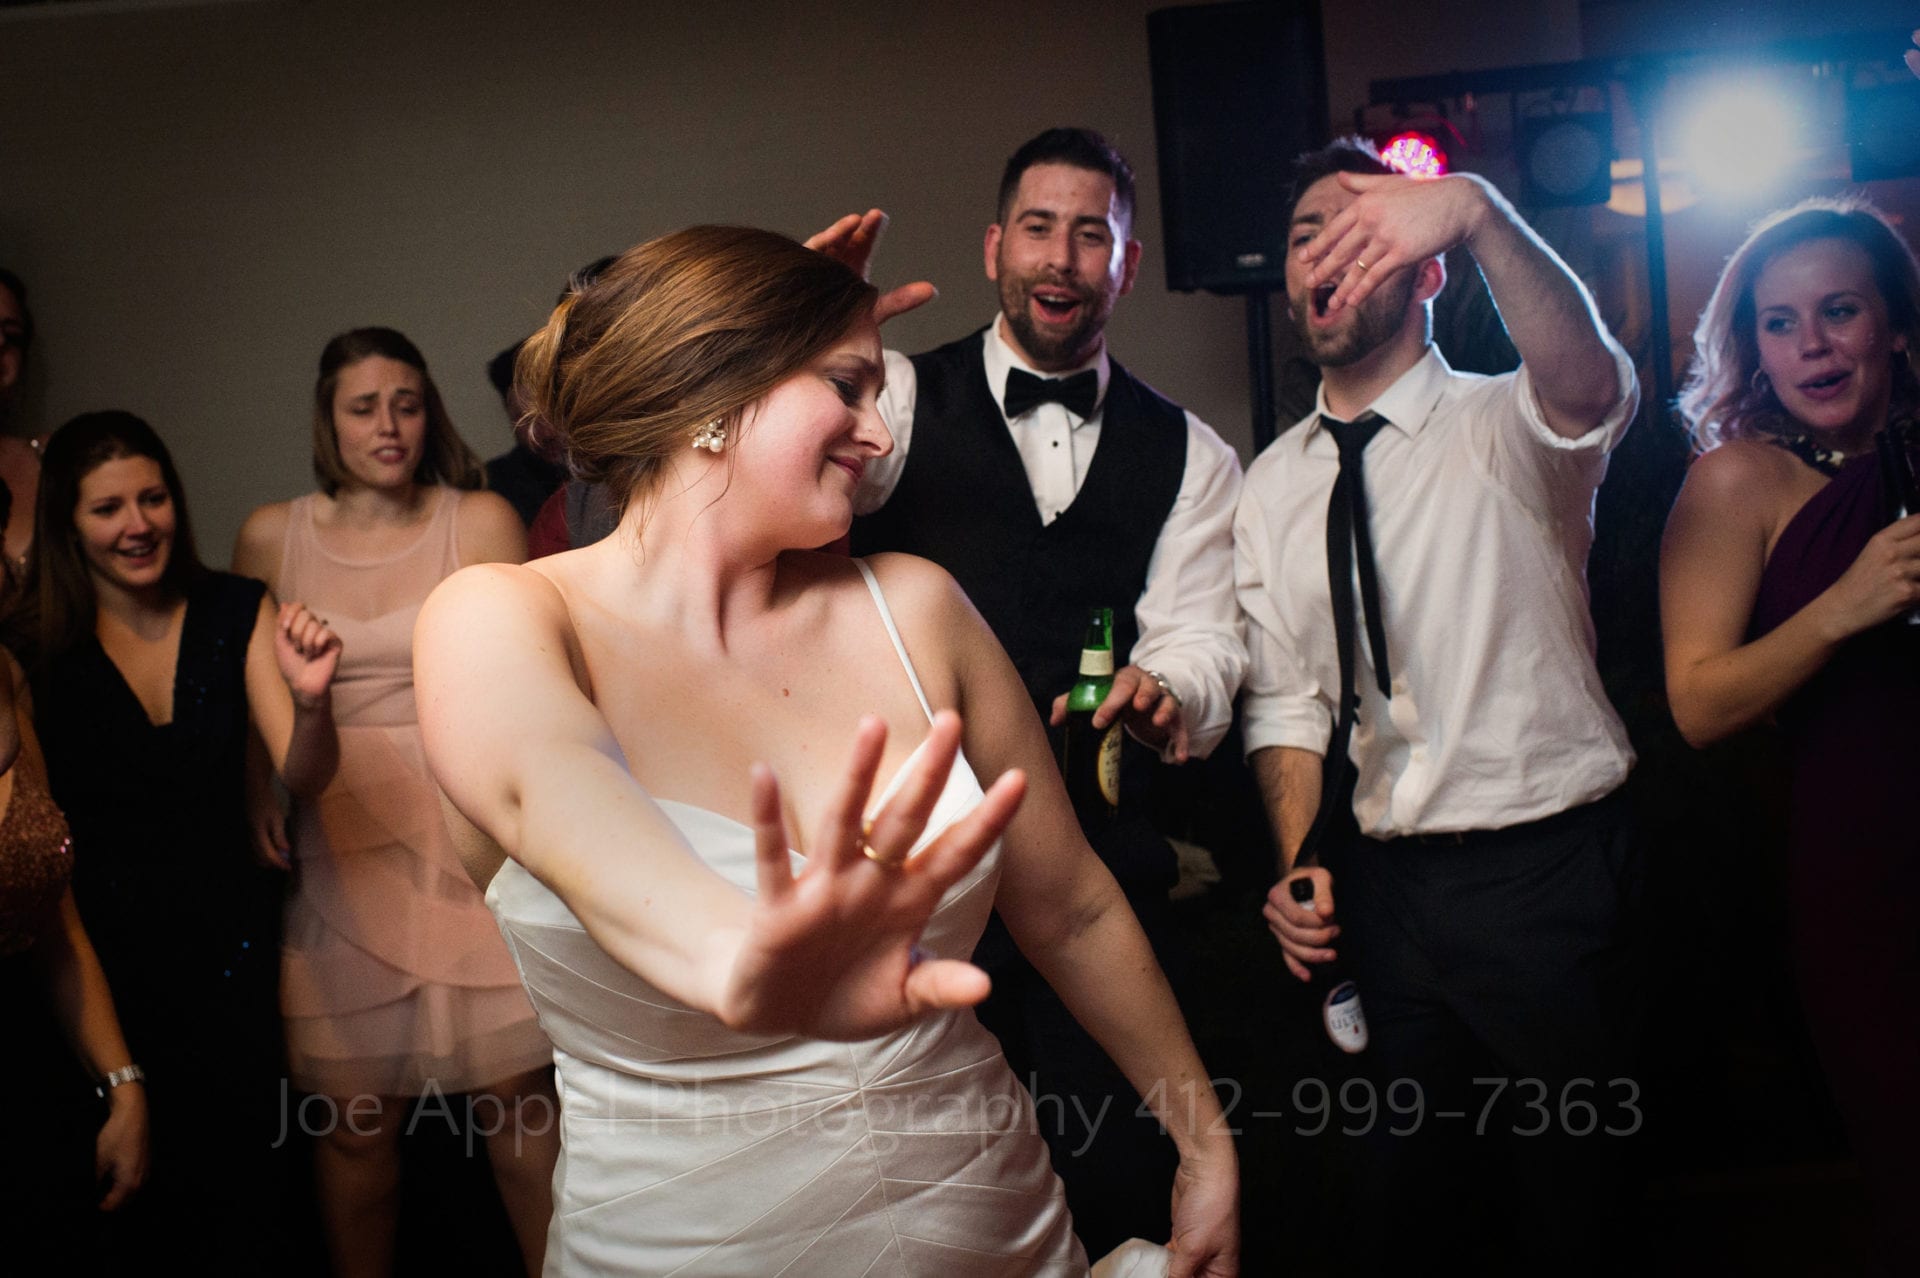 A bride holds her hand out in front of her as she dances in front of a group of cheering guests at her wedding reception.